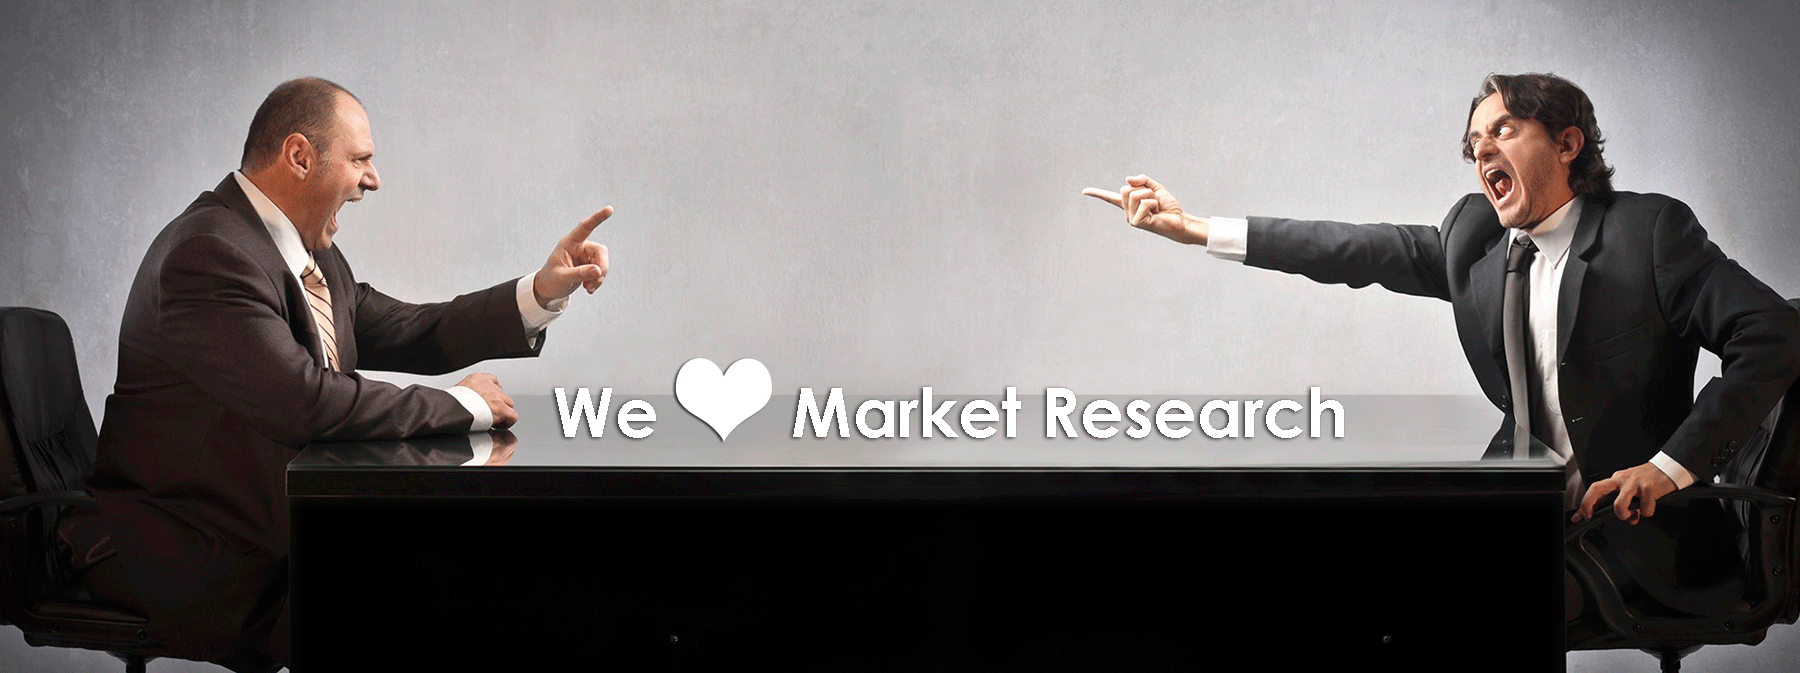 8-Market-Research